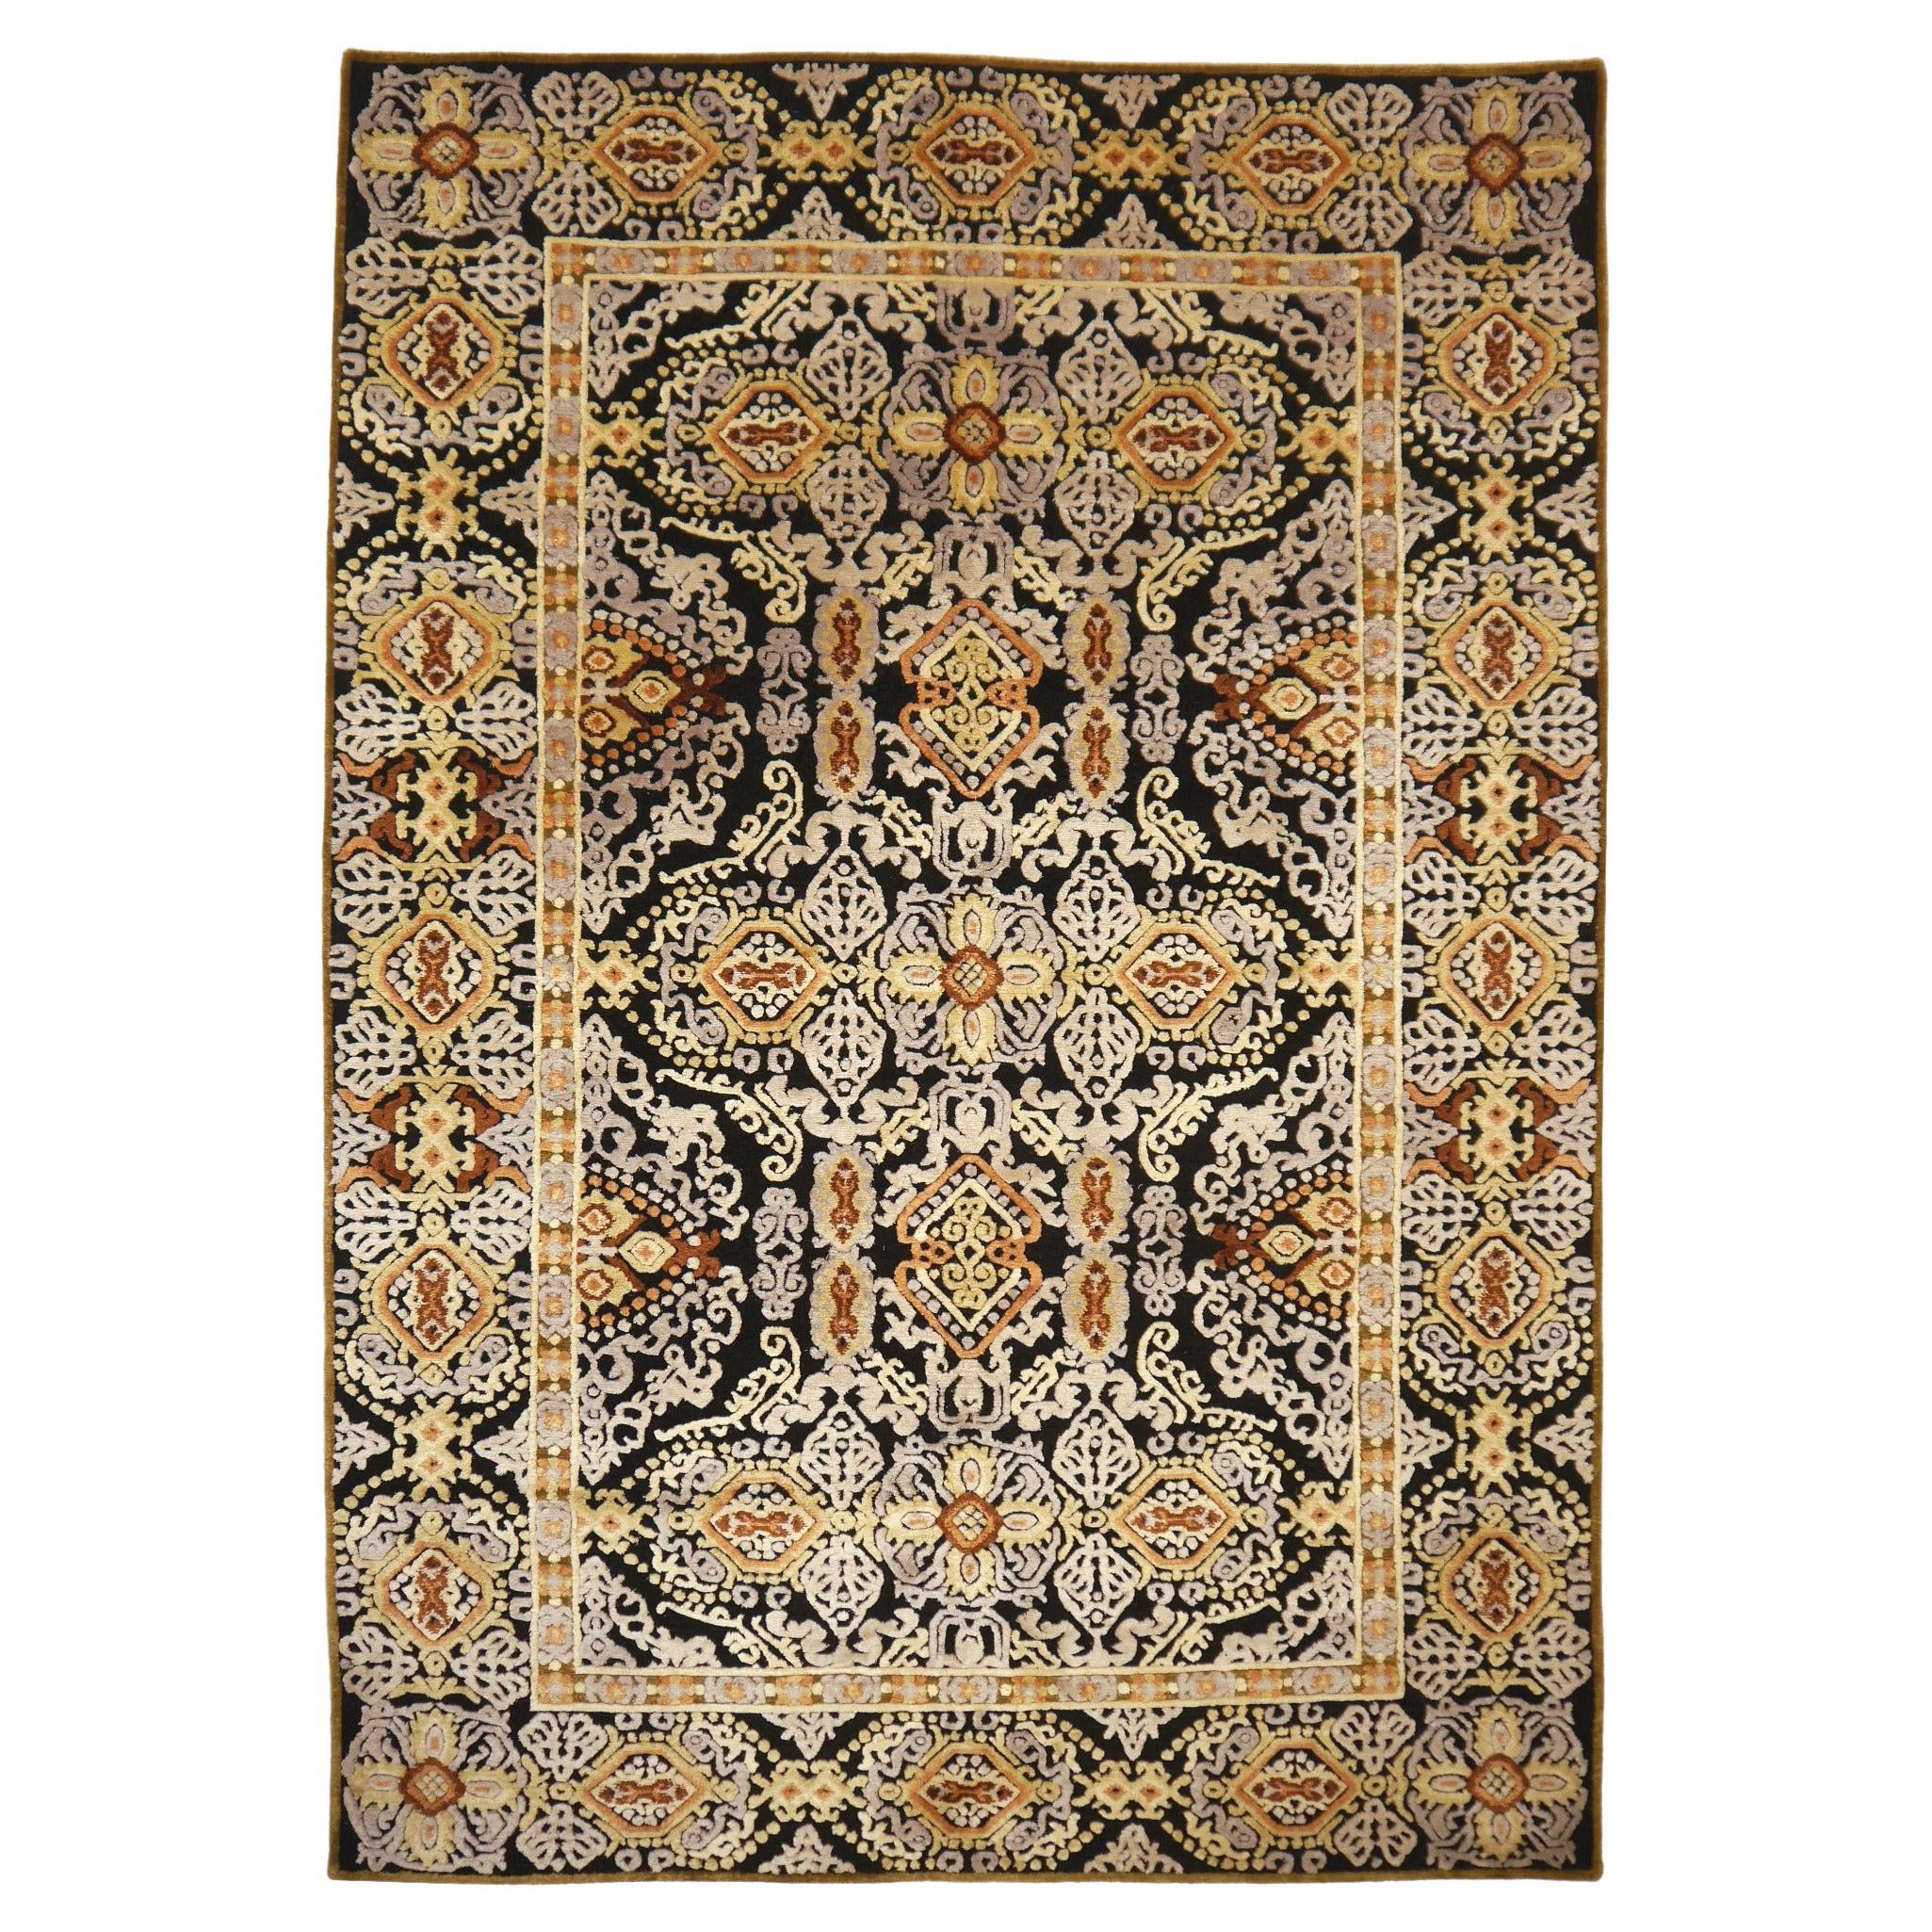 Contemporary Tabriz Design Rug Hand Knotted Wool and Silk Djoharian Collection